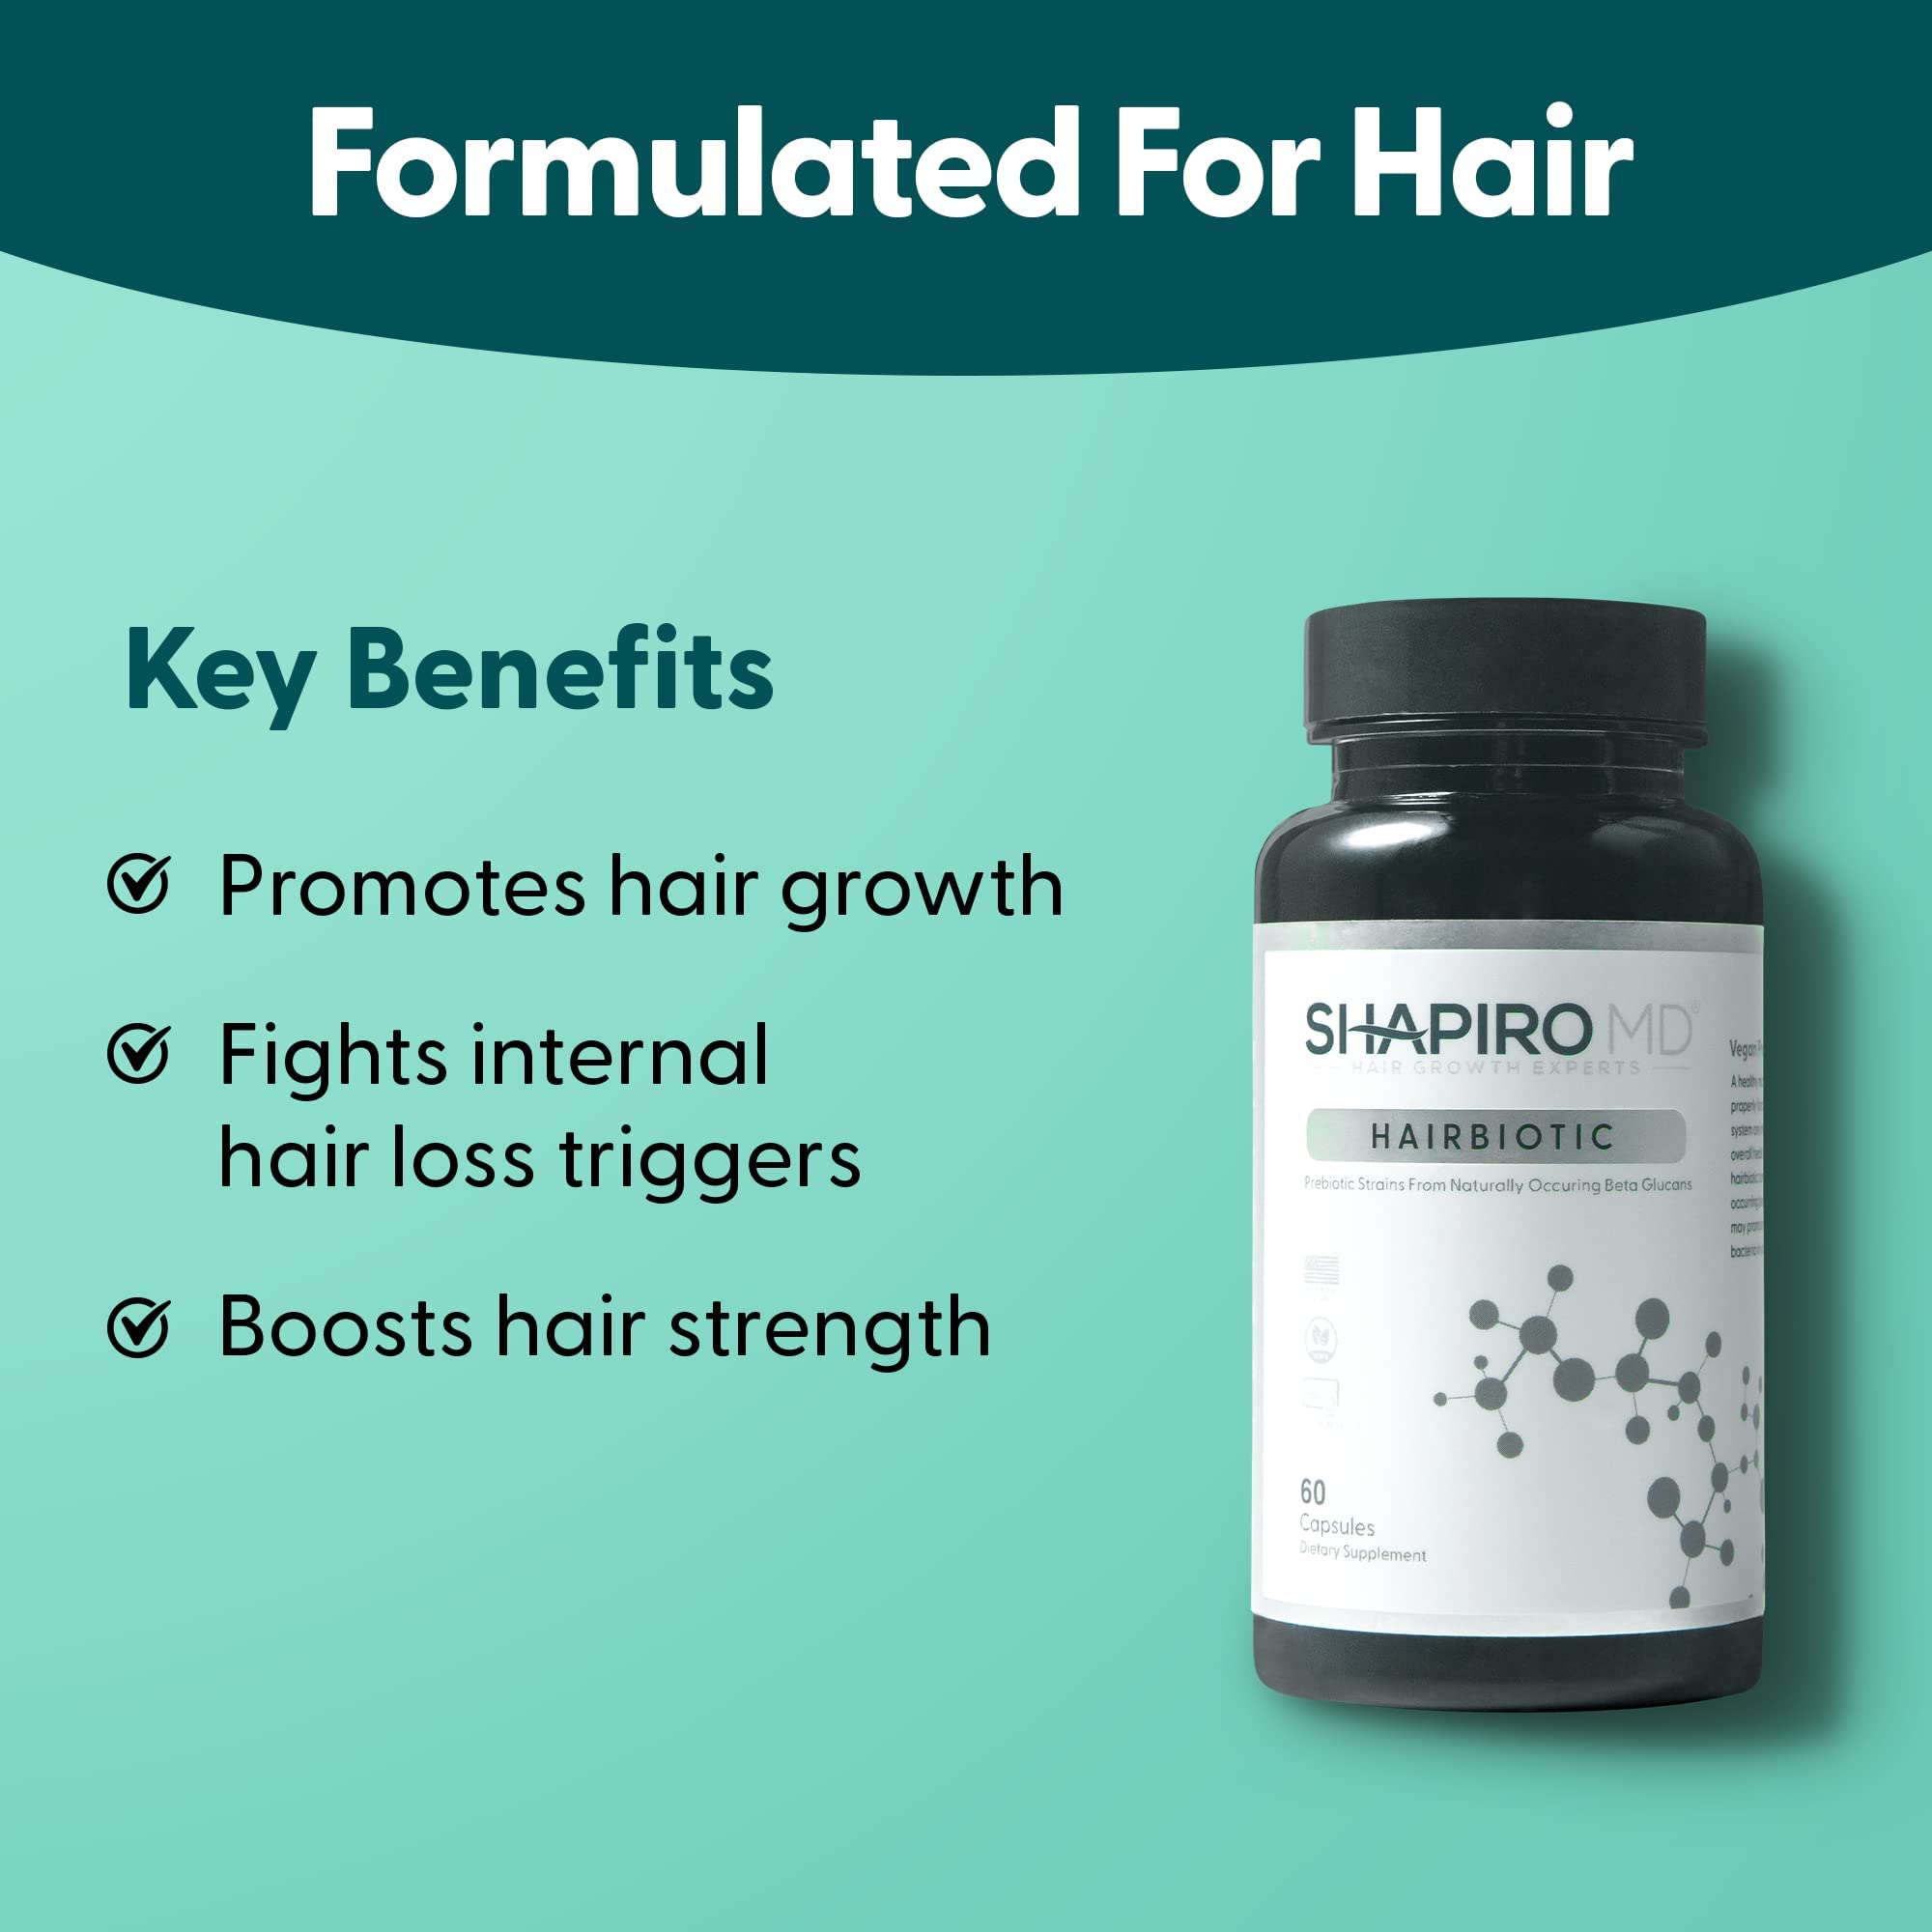 Hair Loss Shampoo, Conditioner, and Hairbiotic | Experience Healthier, Fuller, and Thicker Looking Hair | Hair Loss Solution Developed by Dermatologists | 1 Month Supply